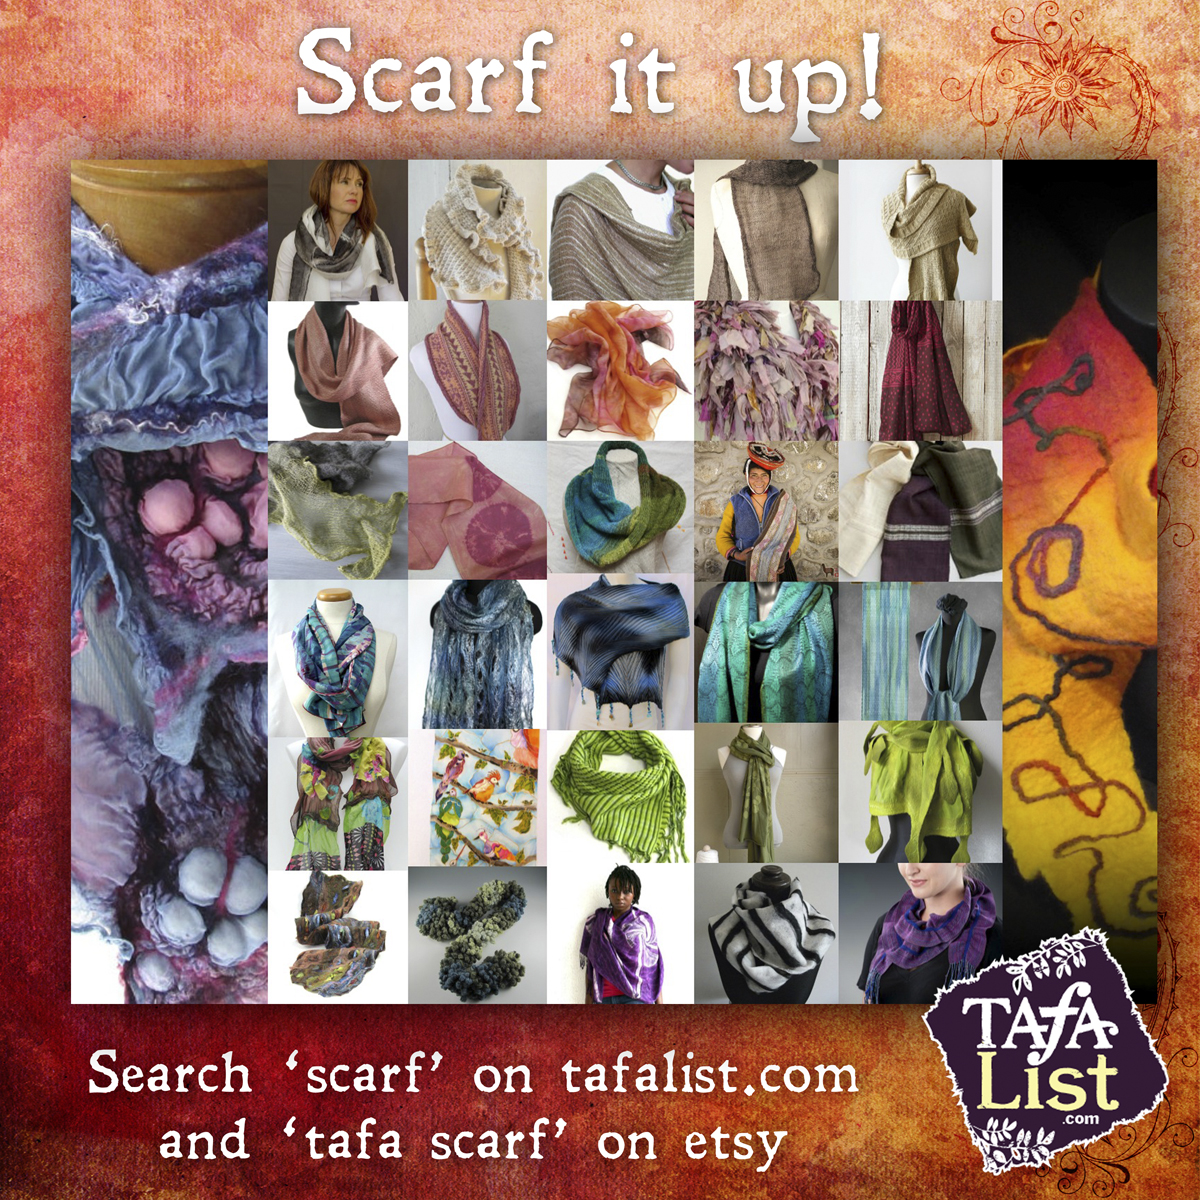 Scarves and textiles created by members of TAFA